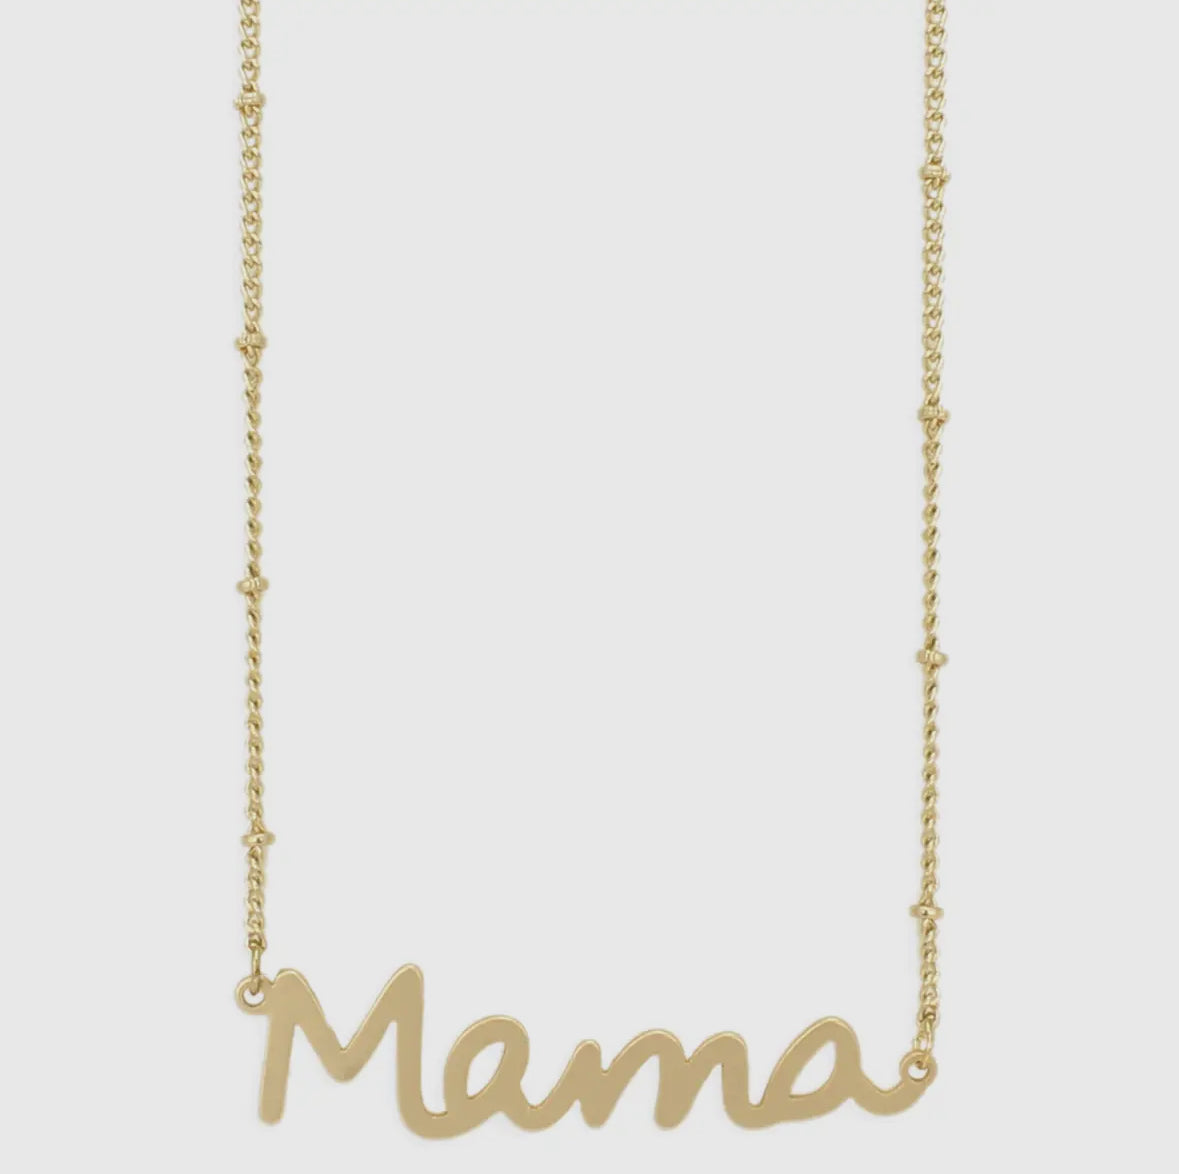 Mom’s love necklace